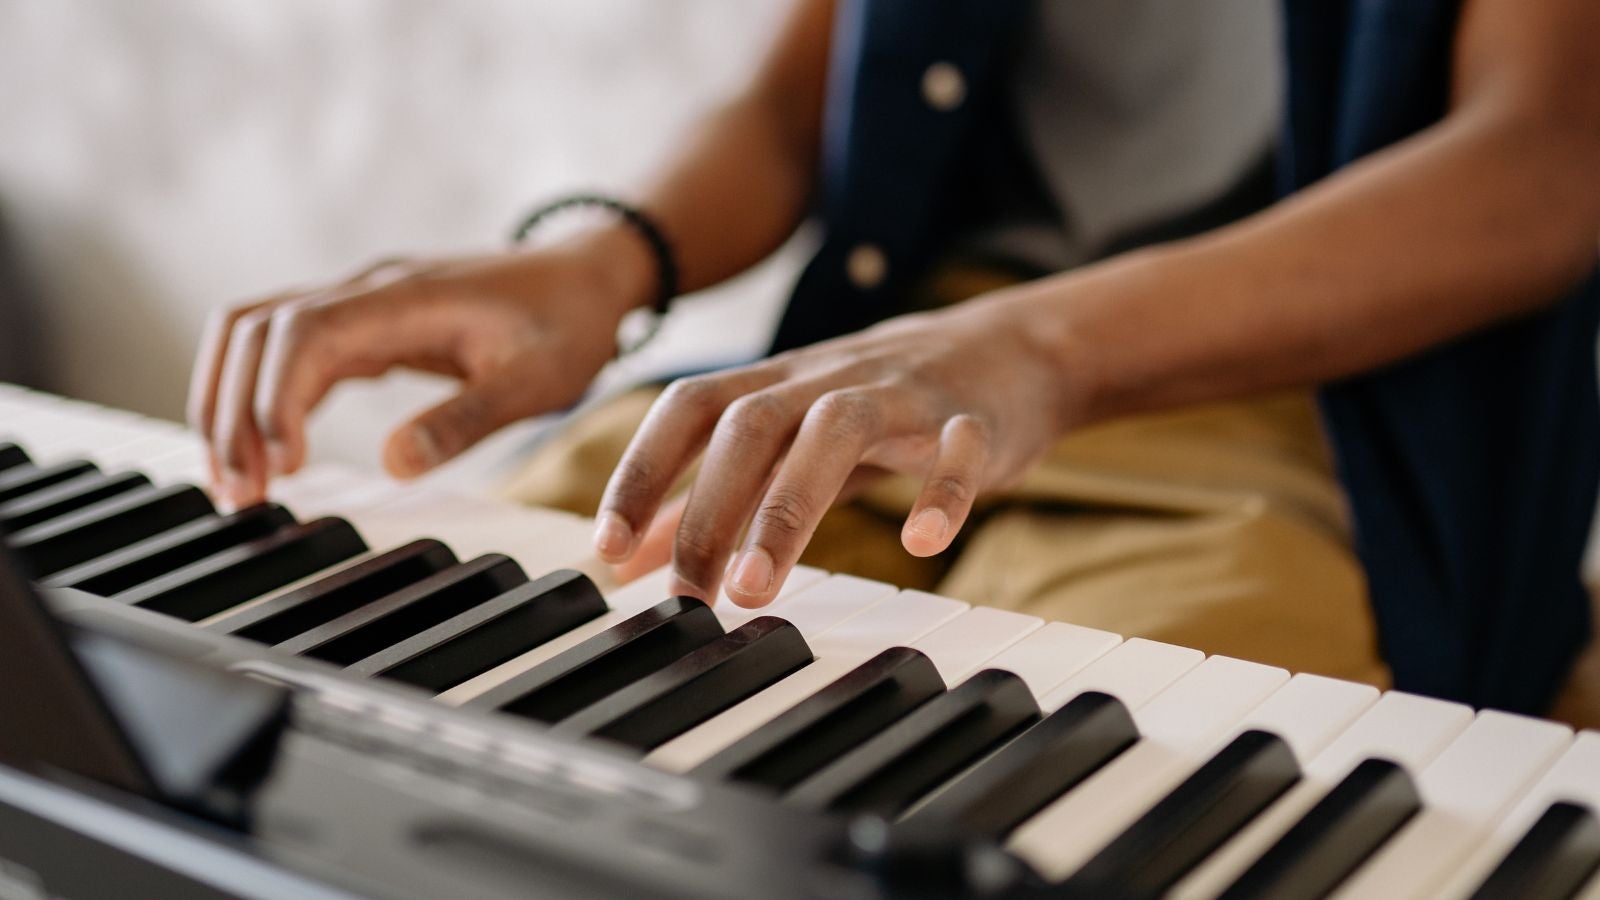 A student playing on a piano keyboard.